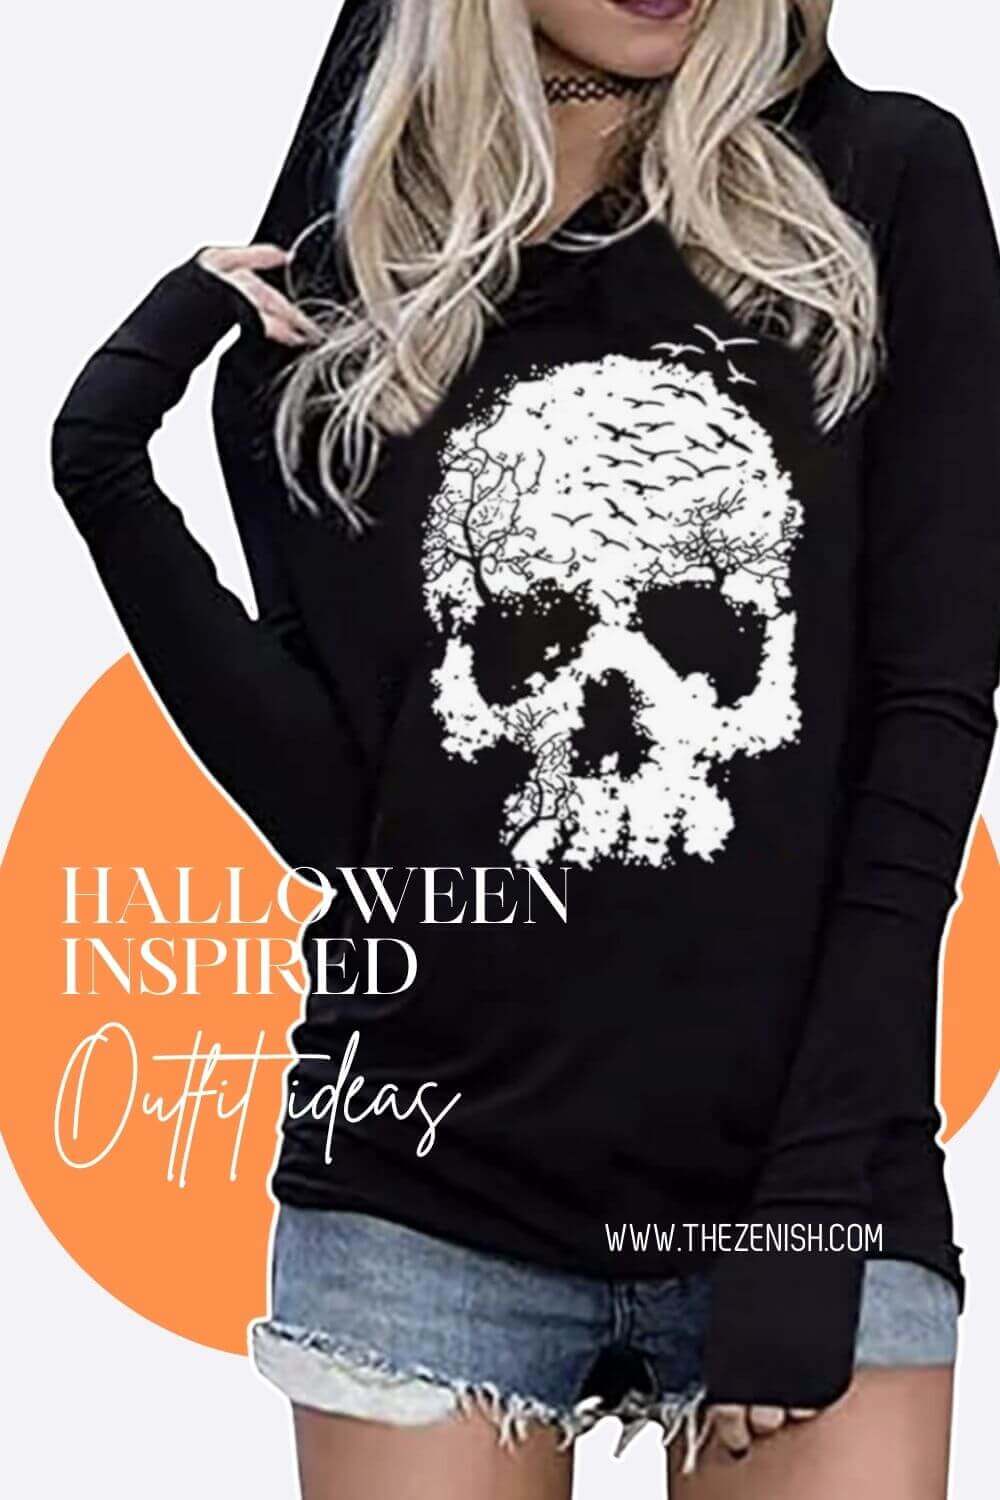 13 Spooktacular Halloween Inspired Outfit Ideas 4 13 Spooktacular Halloween Inspired Outfit Ideas